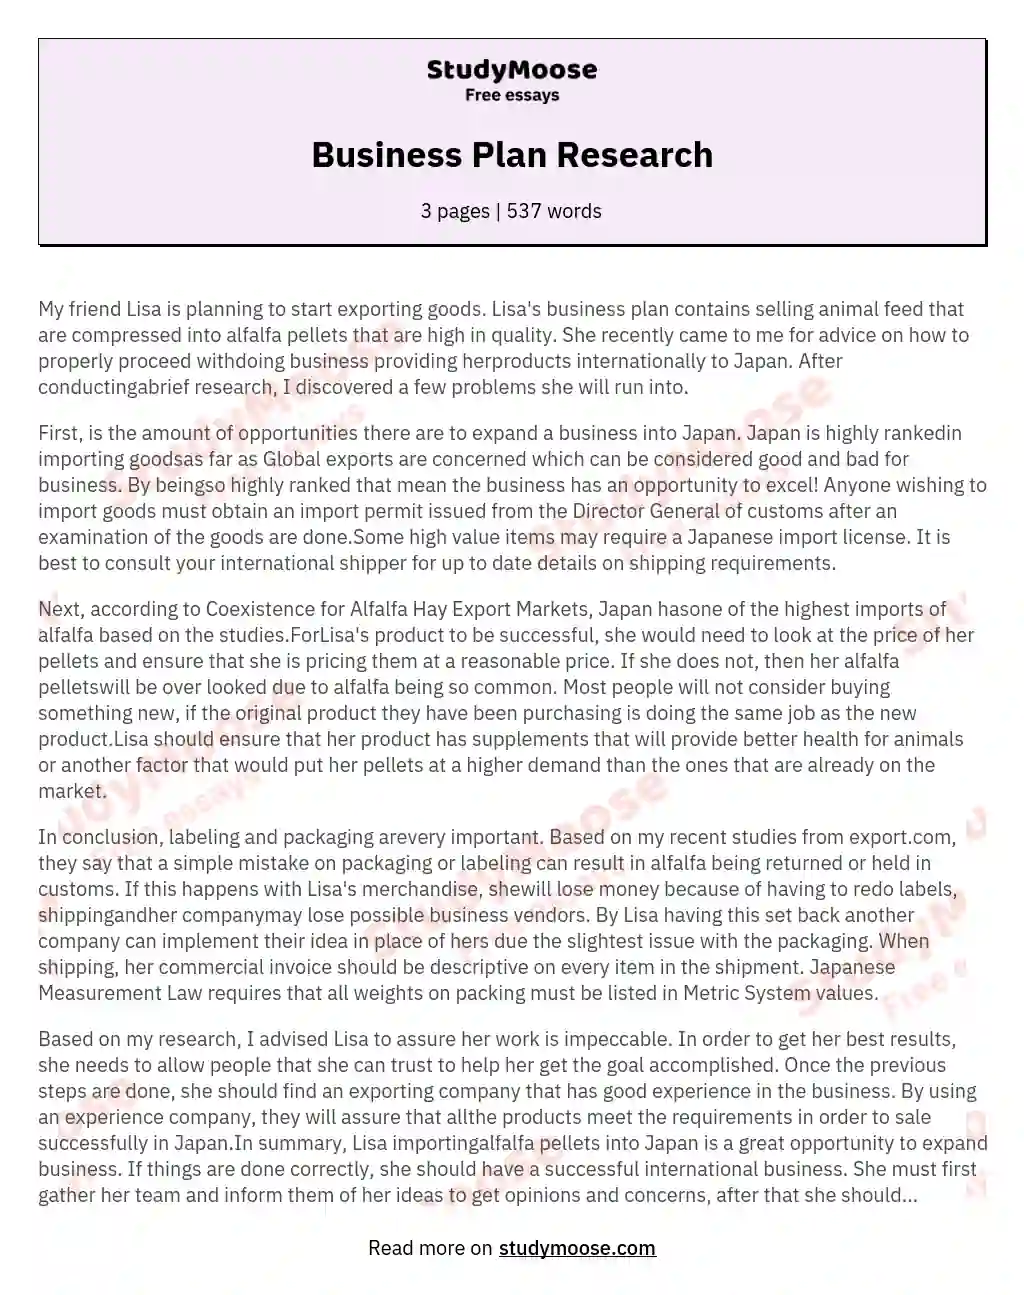 Business Plan Research essay